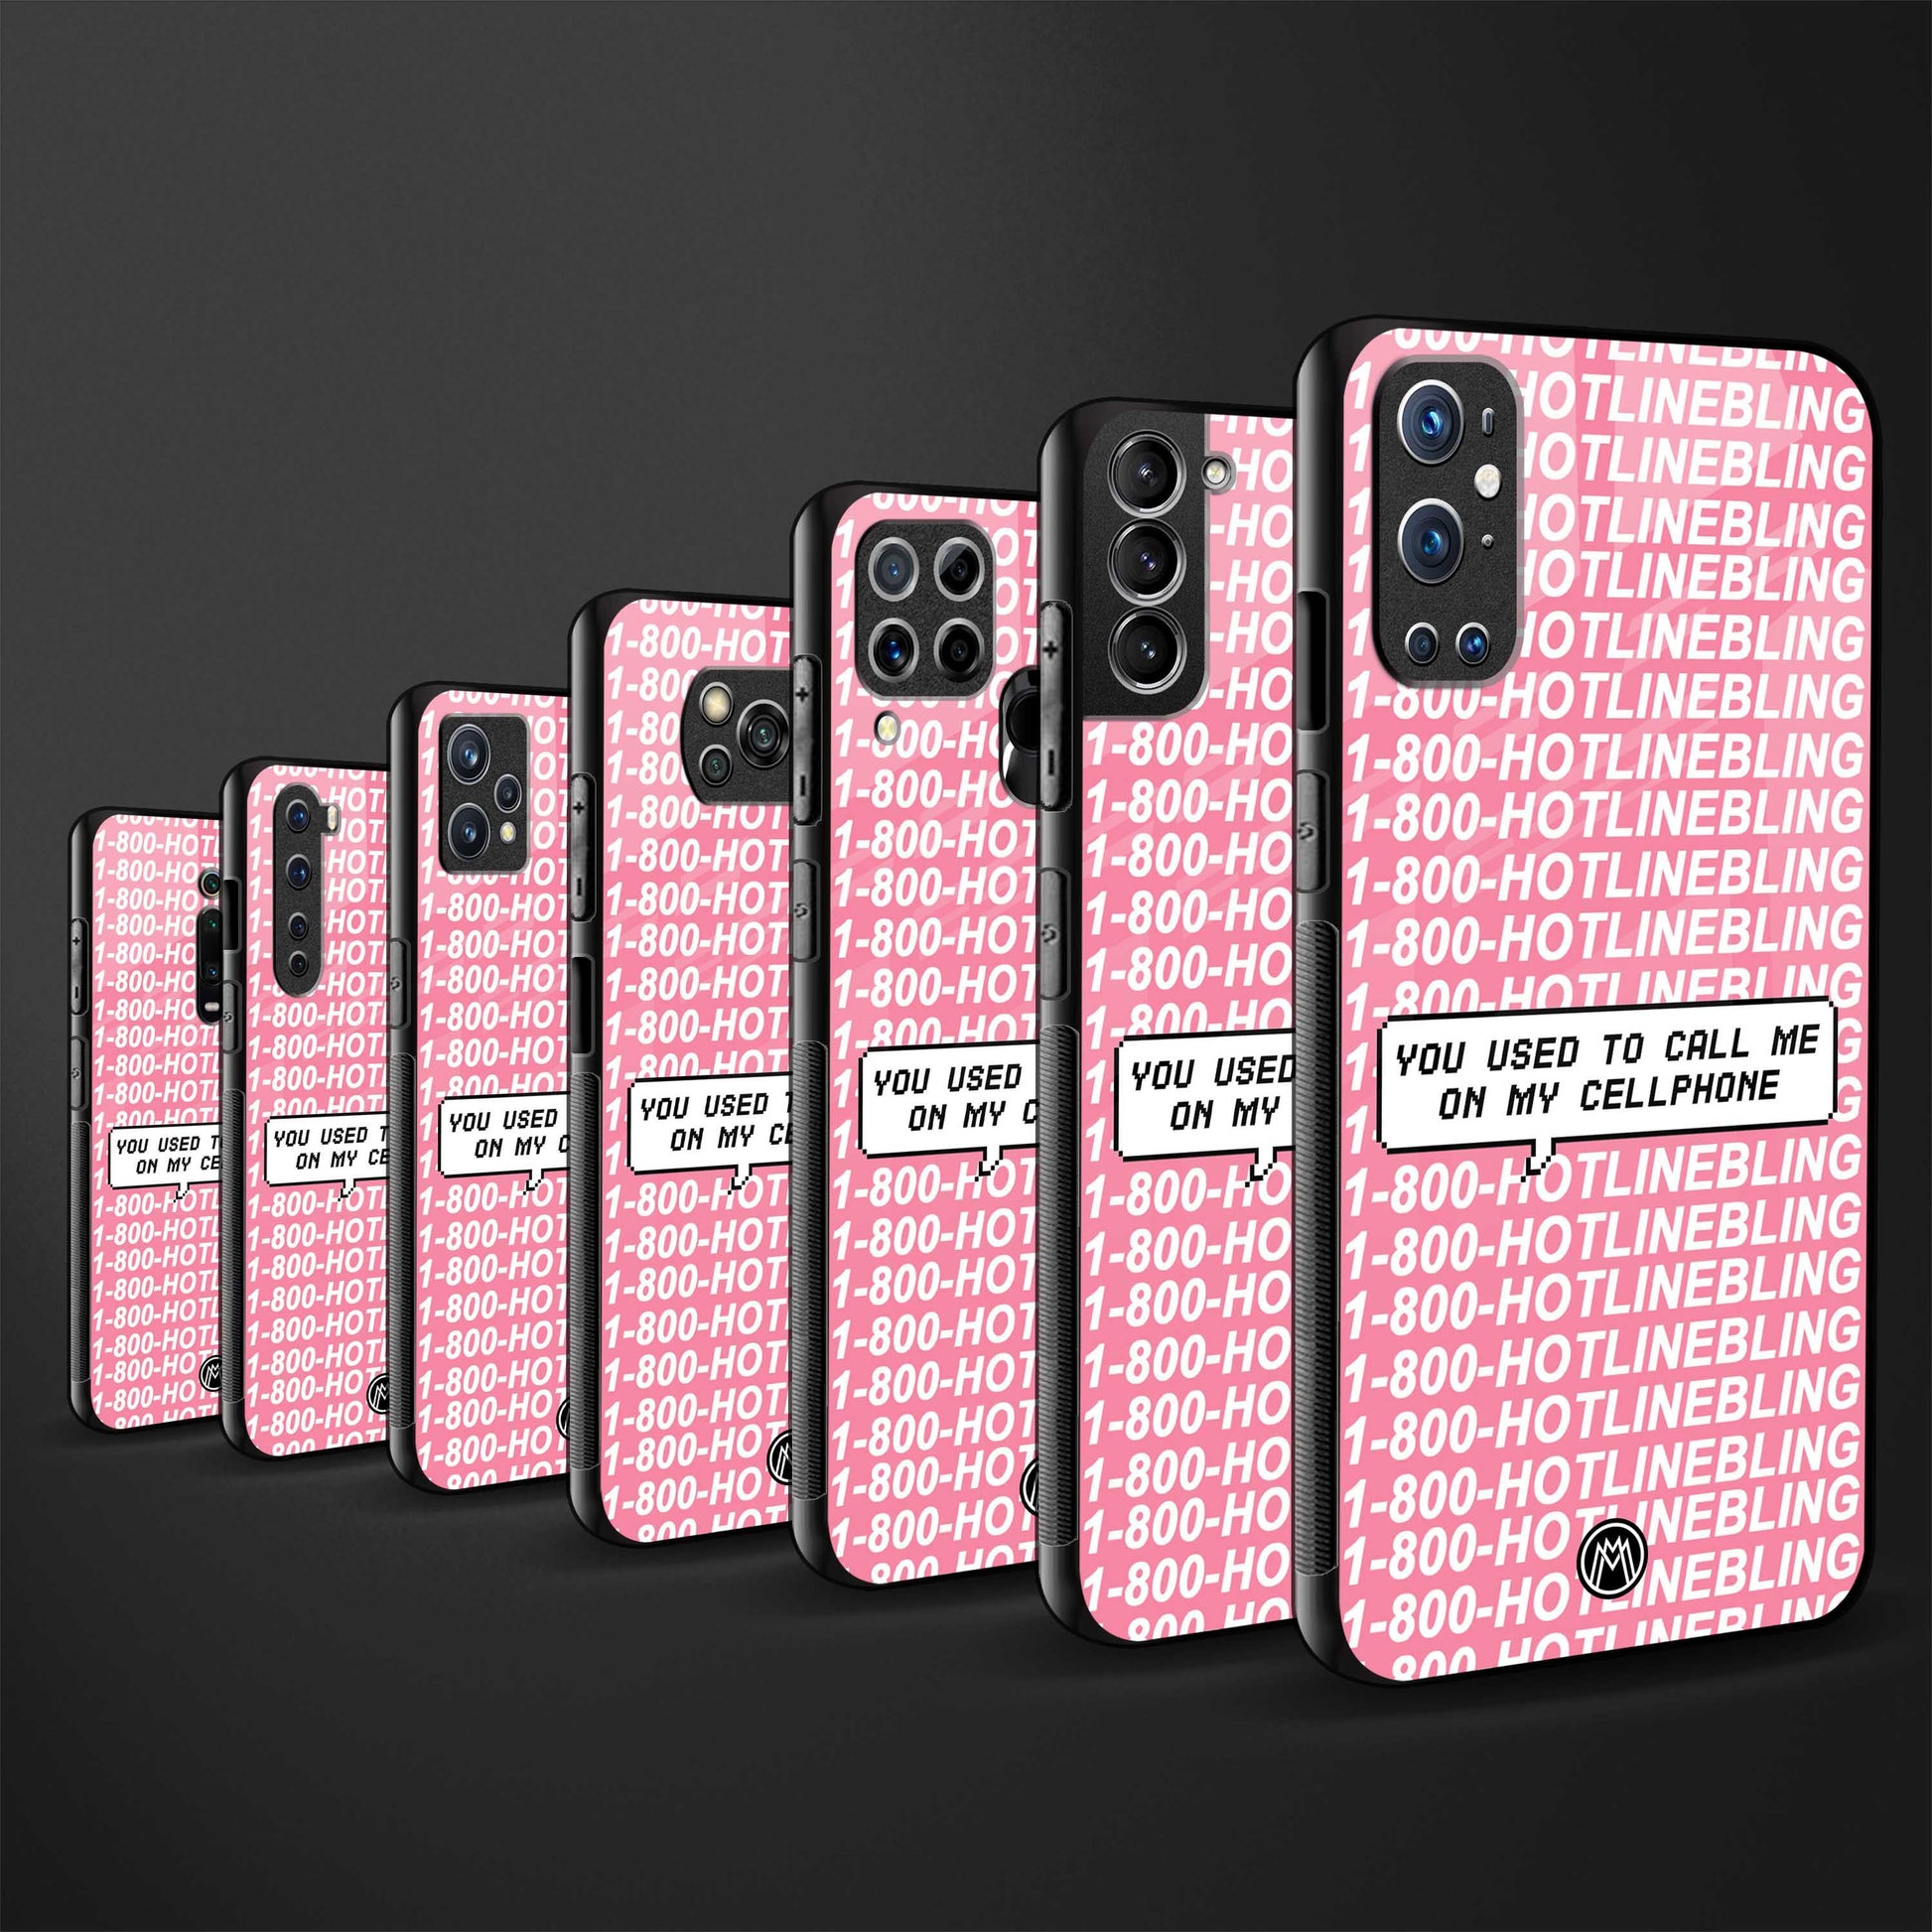 1800 hotline bling phone cover for samsung galaxy note 20 